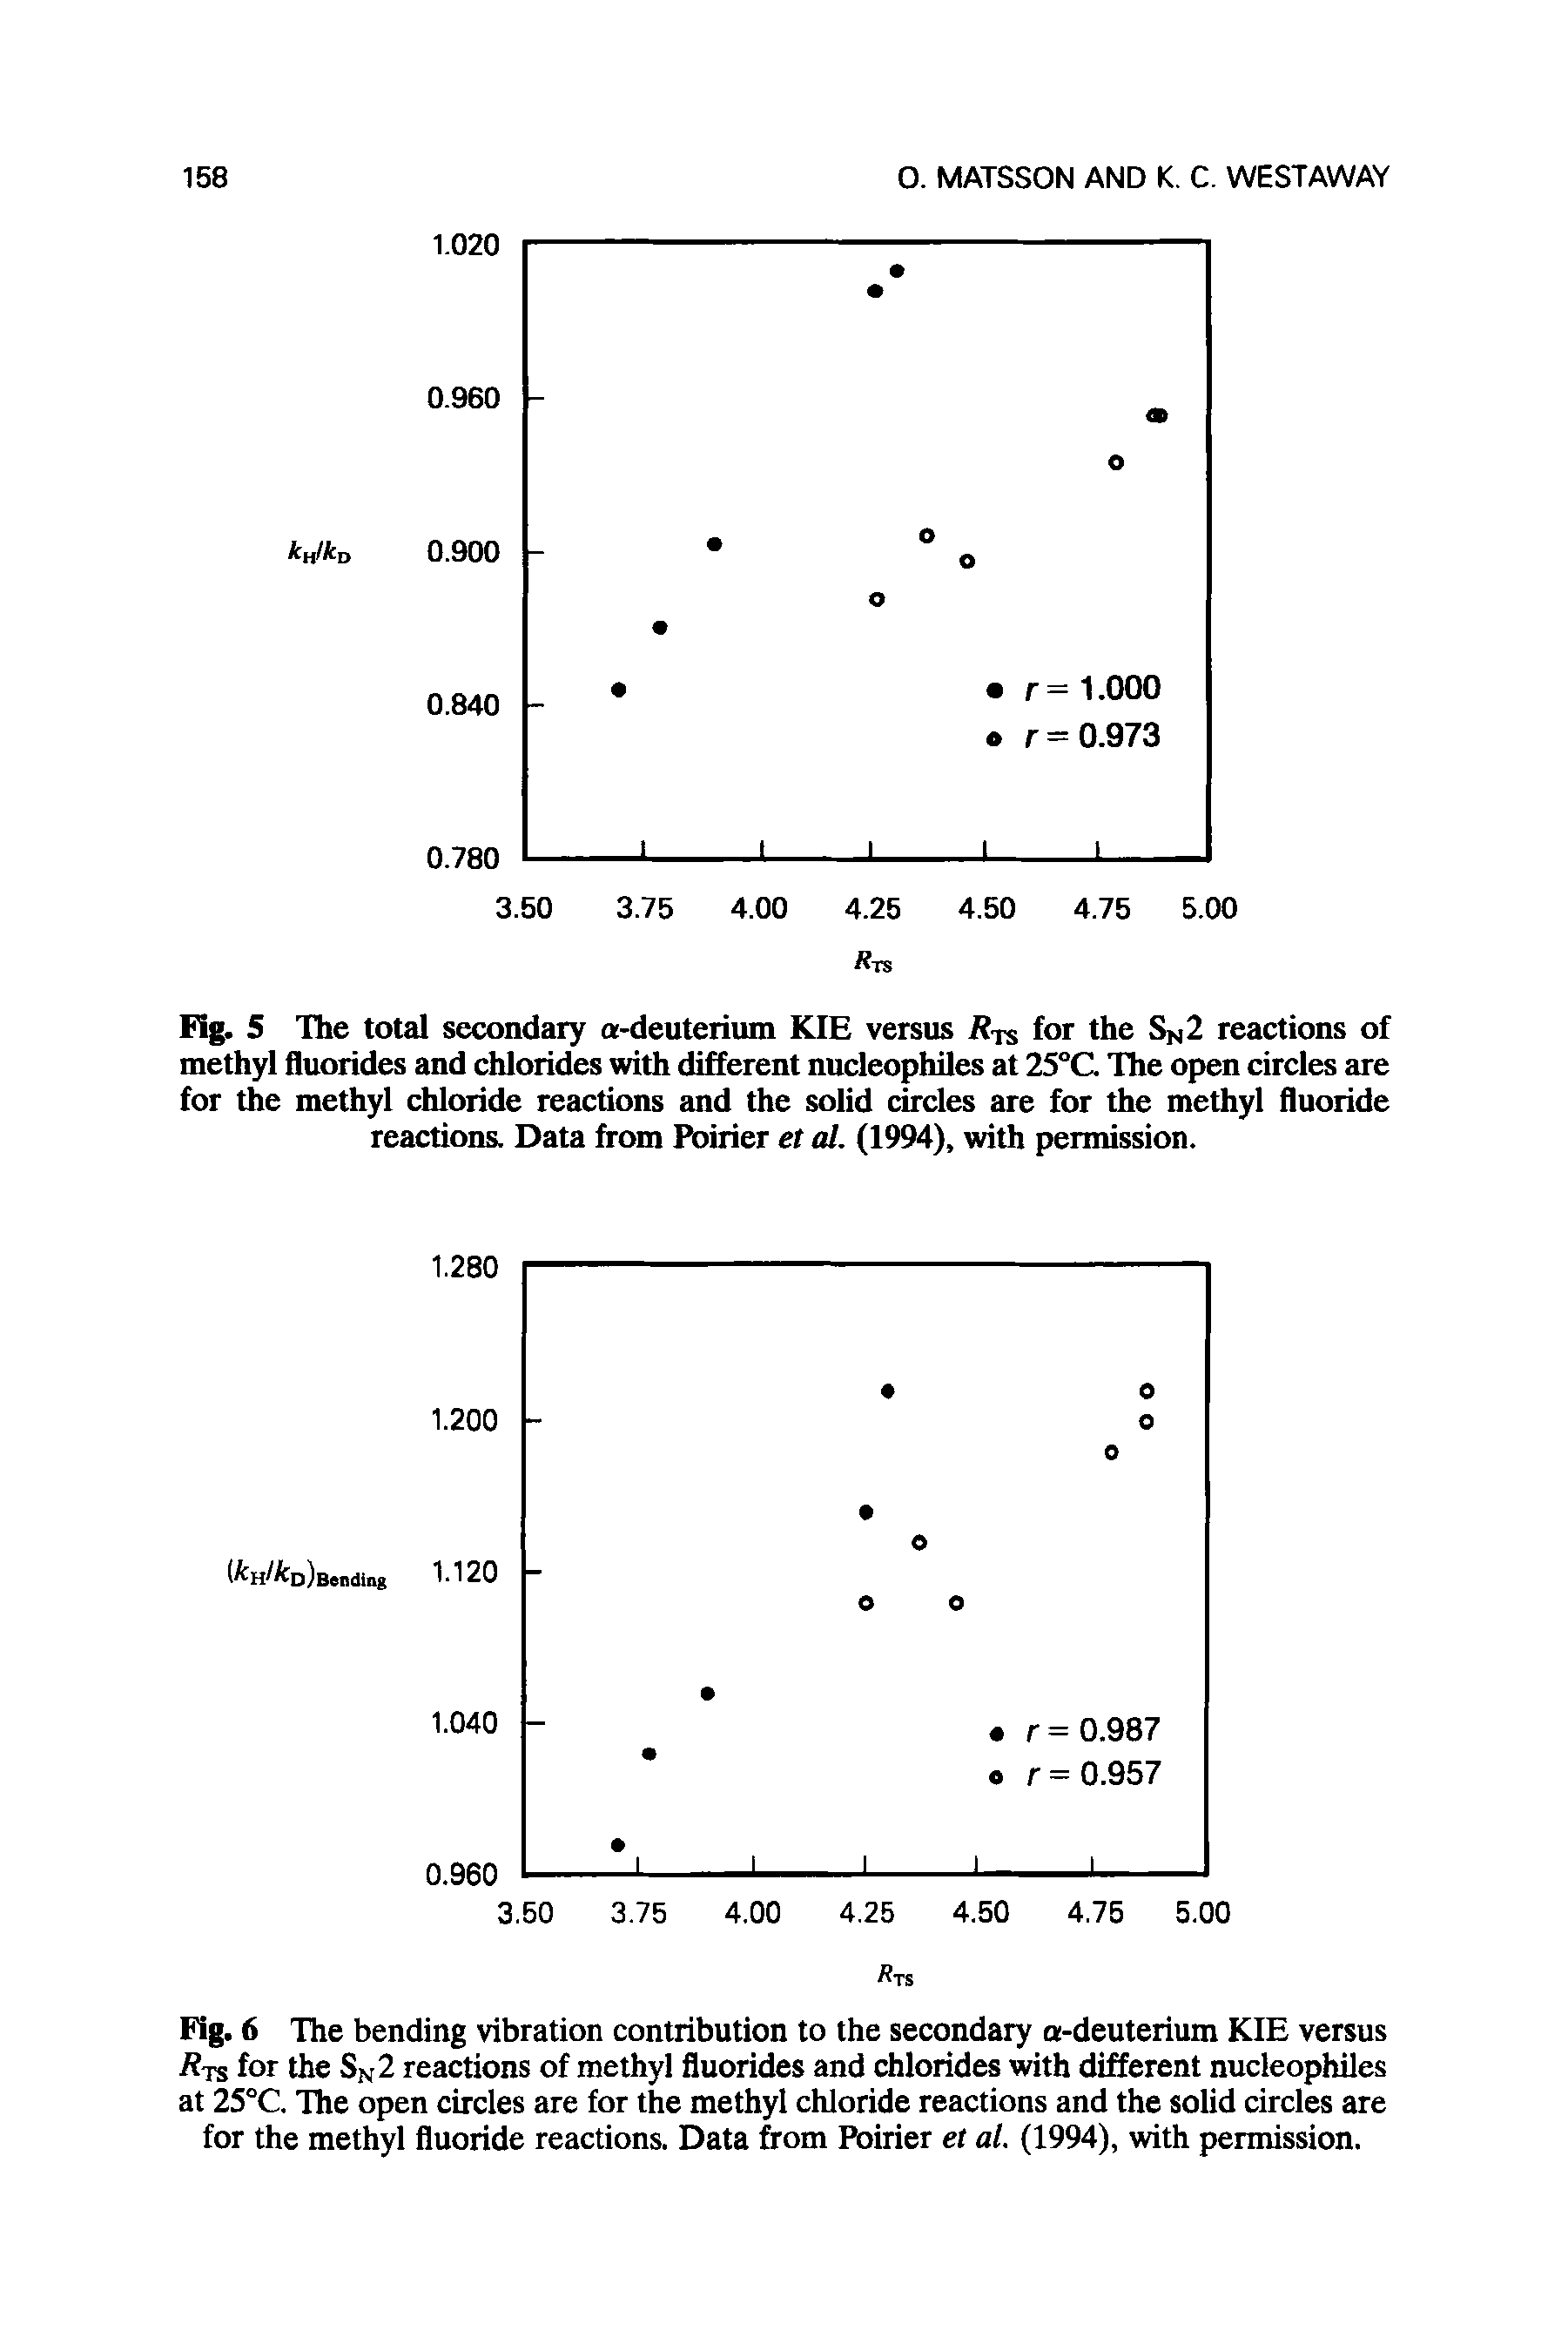 Fig. 5 The total secondary a-deuterium KIE versus rs for the Sn2 reactions of methyl fluorides and chlorides with different nucleophiles at 25°C The open circles are for the methyl chloride reactions and the solid circles are for the methyl fluoride reactions. Data from Poirier et al. (1994), with permission.